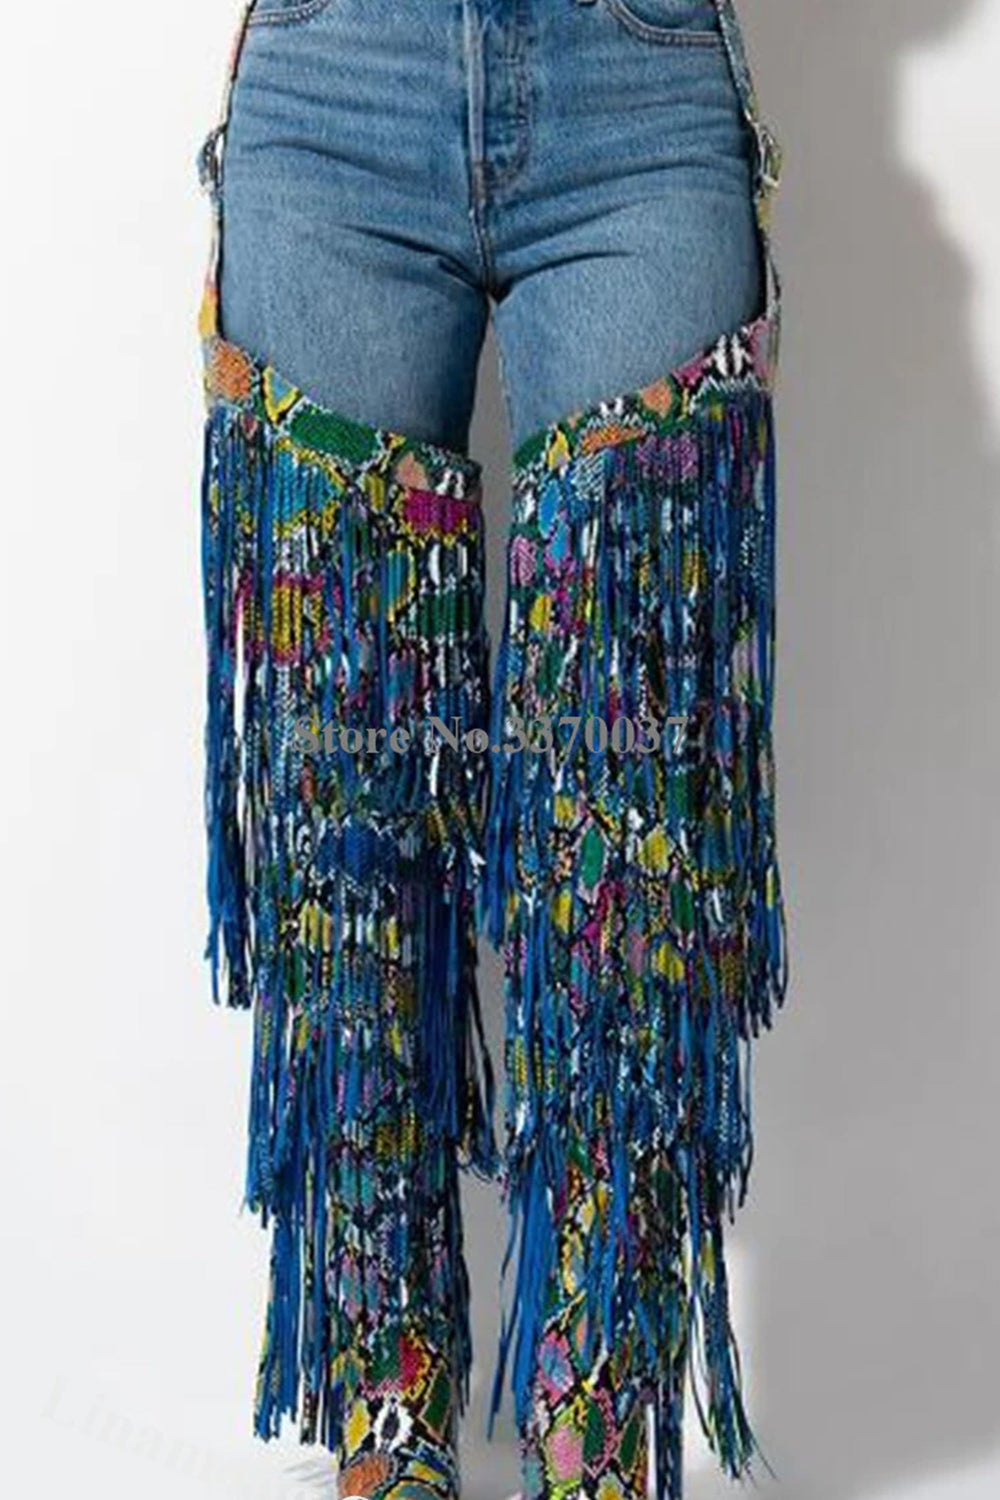 Faux Suede Belted Fringe Thigh High Stiletto Boots - Snake Print